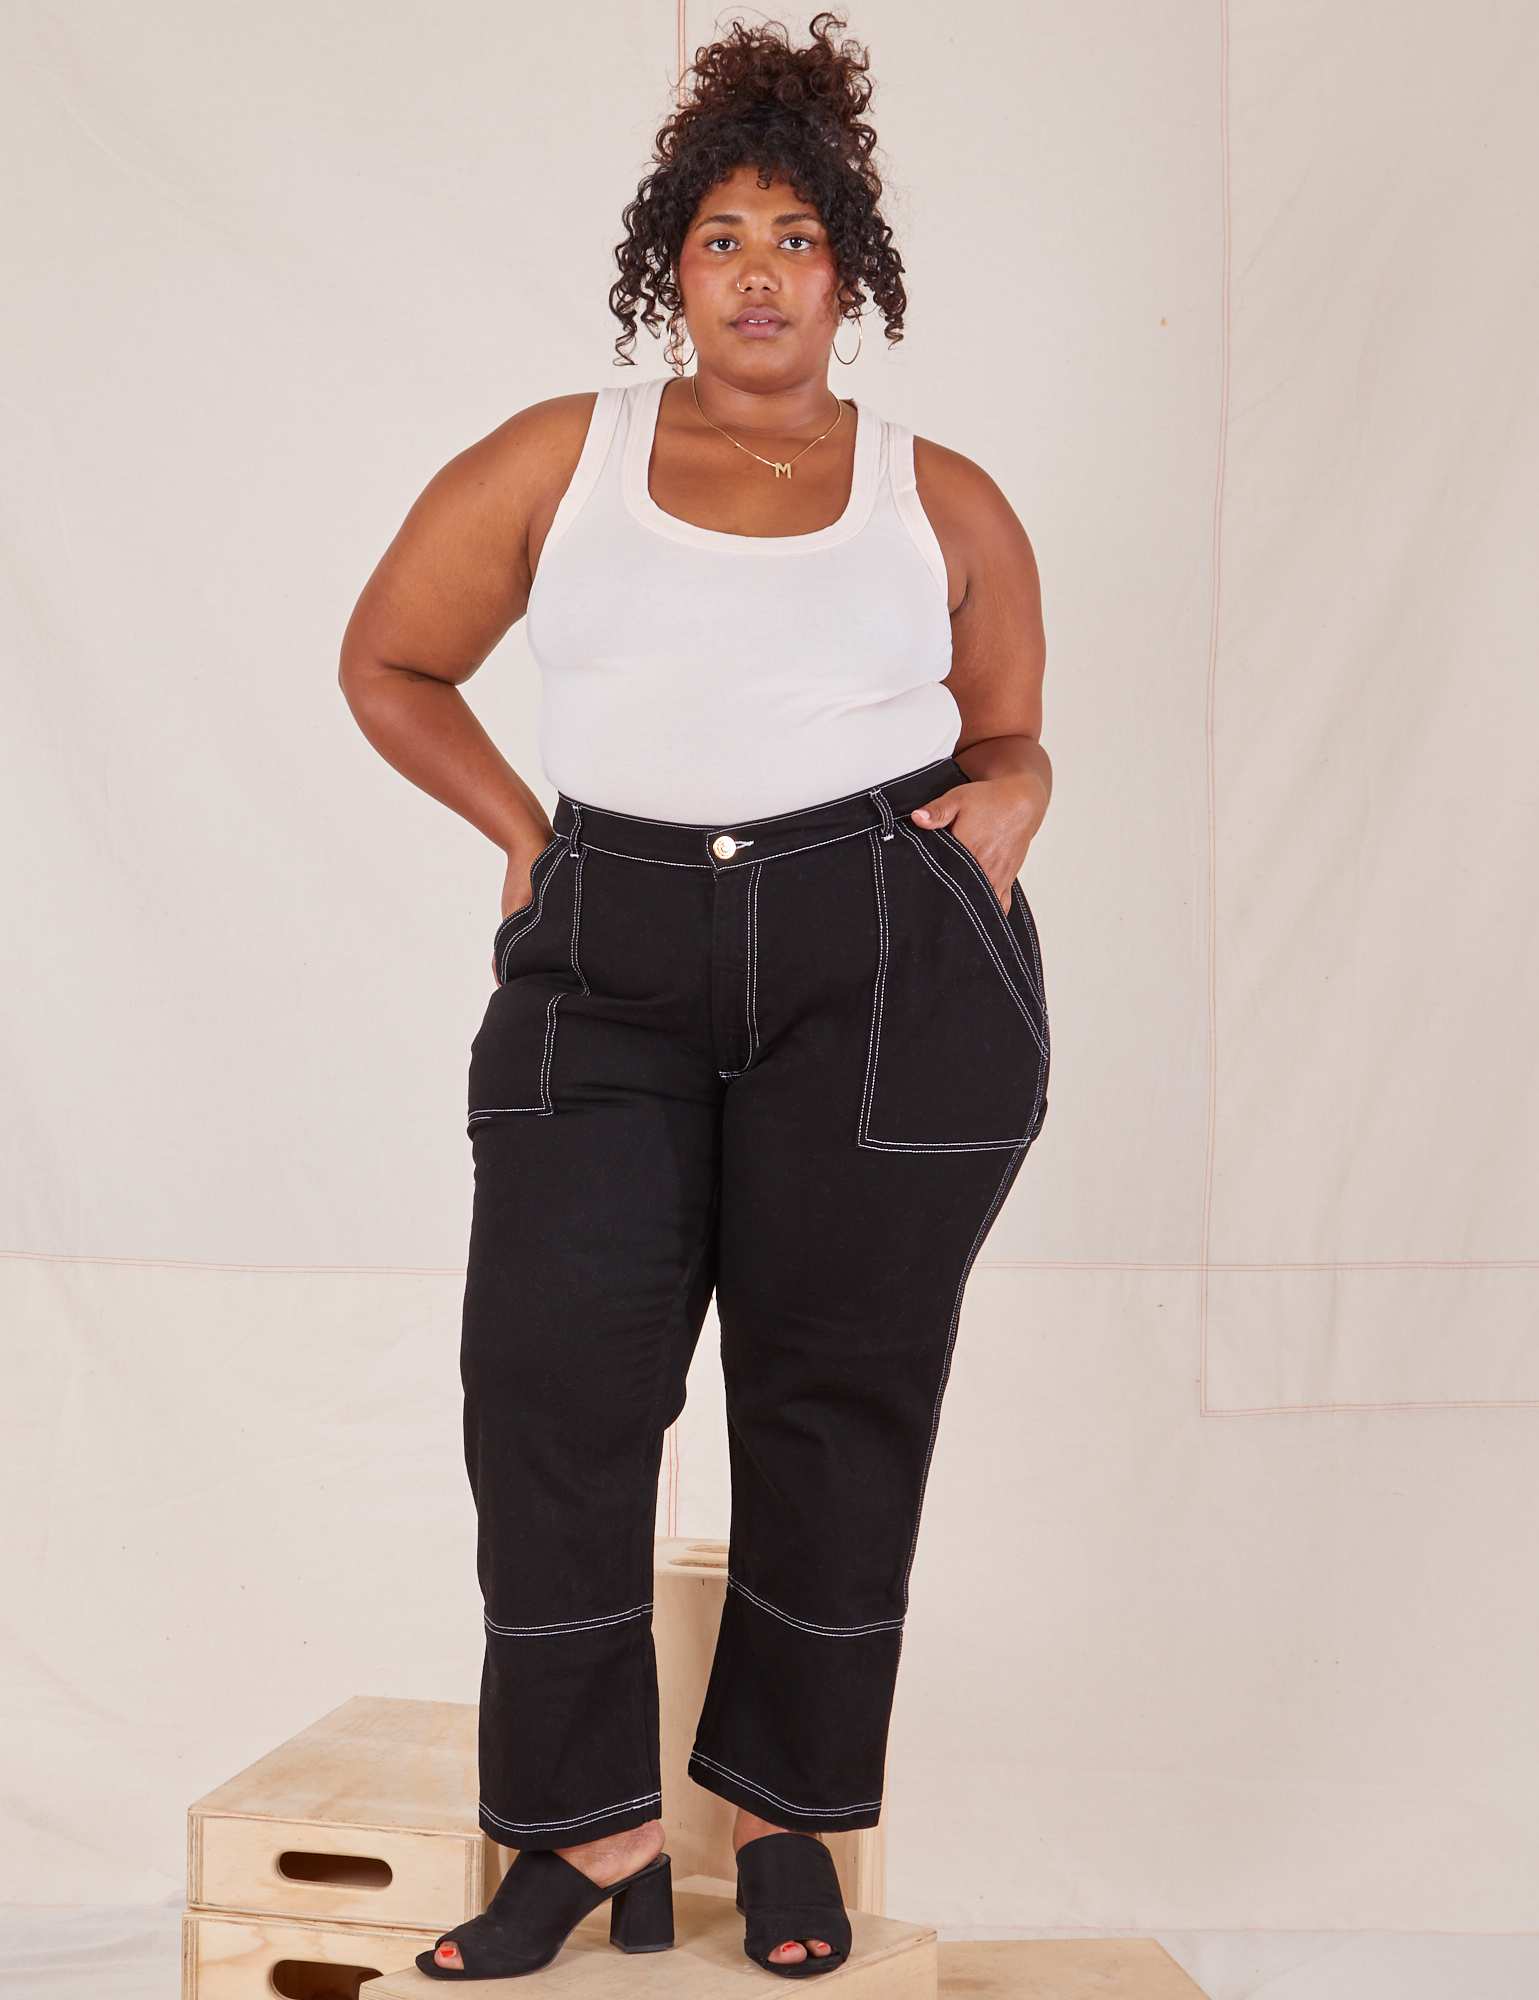 Morgan is 5&#39;5&quot; and wearing 1XL Carpenter Jeans in Black paired with vintage off-white Tank Top